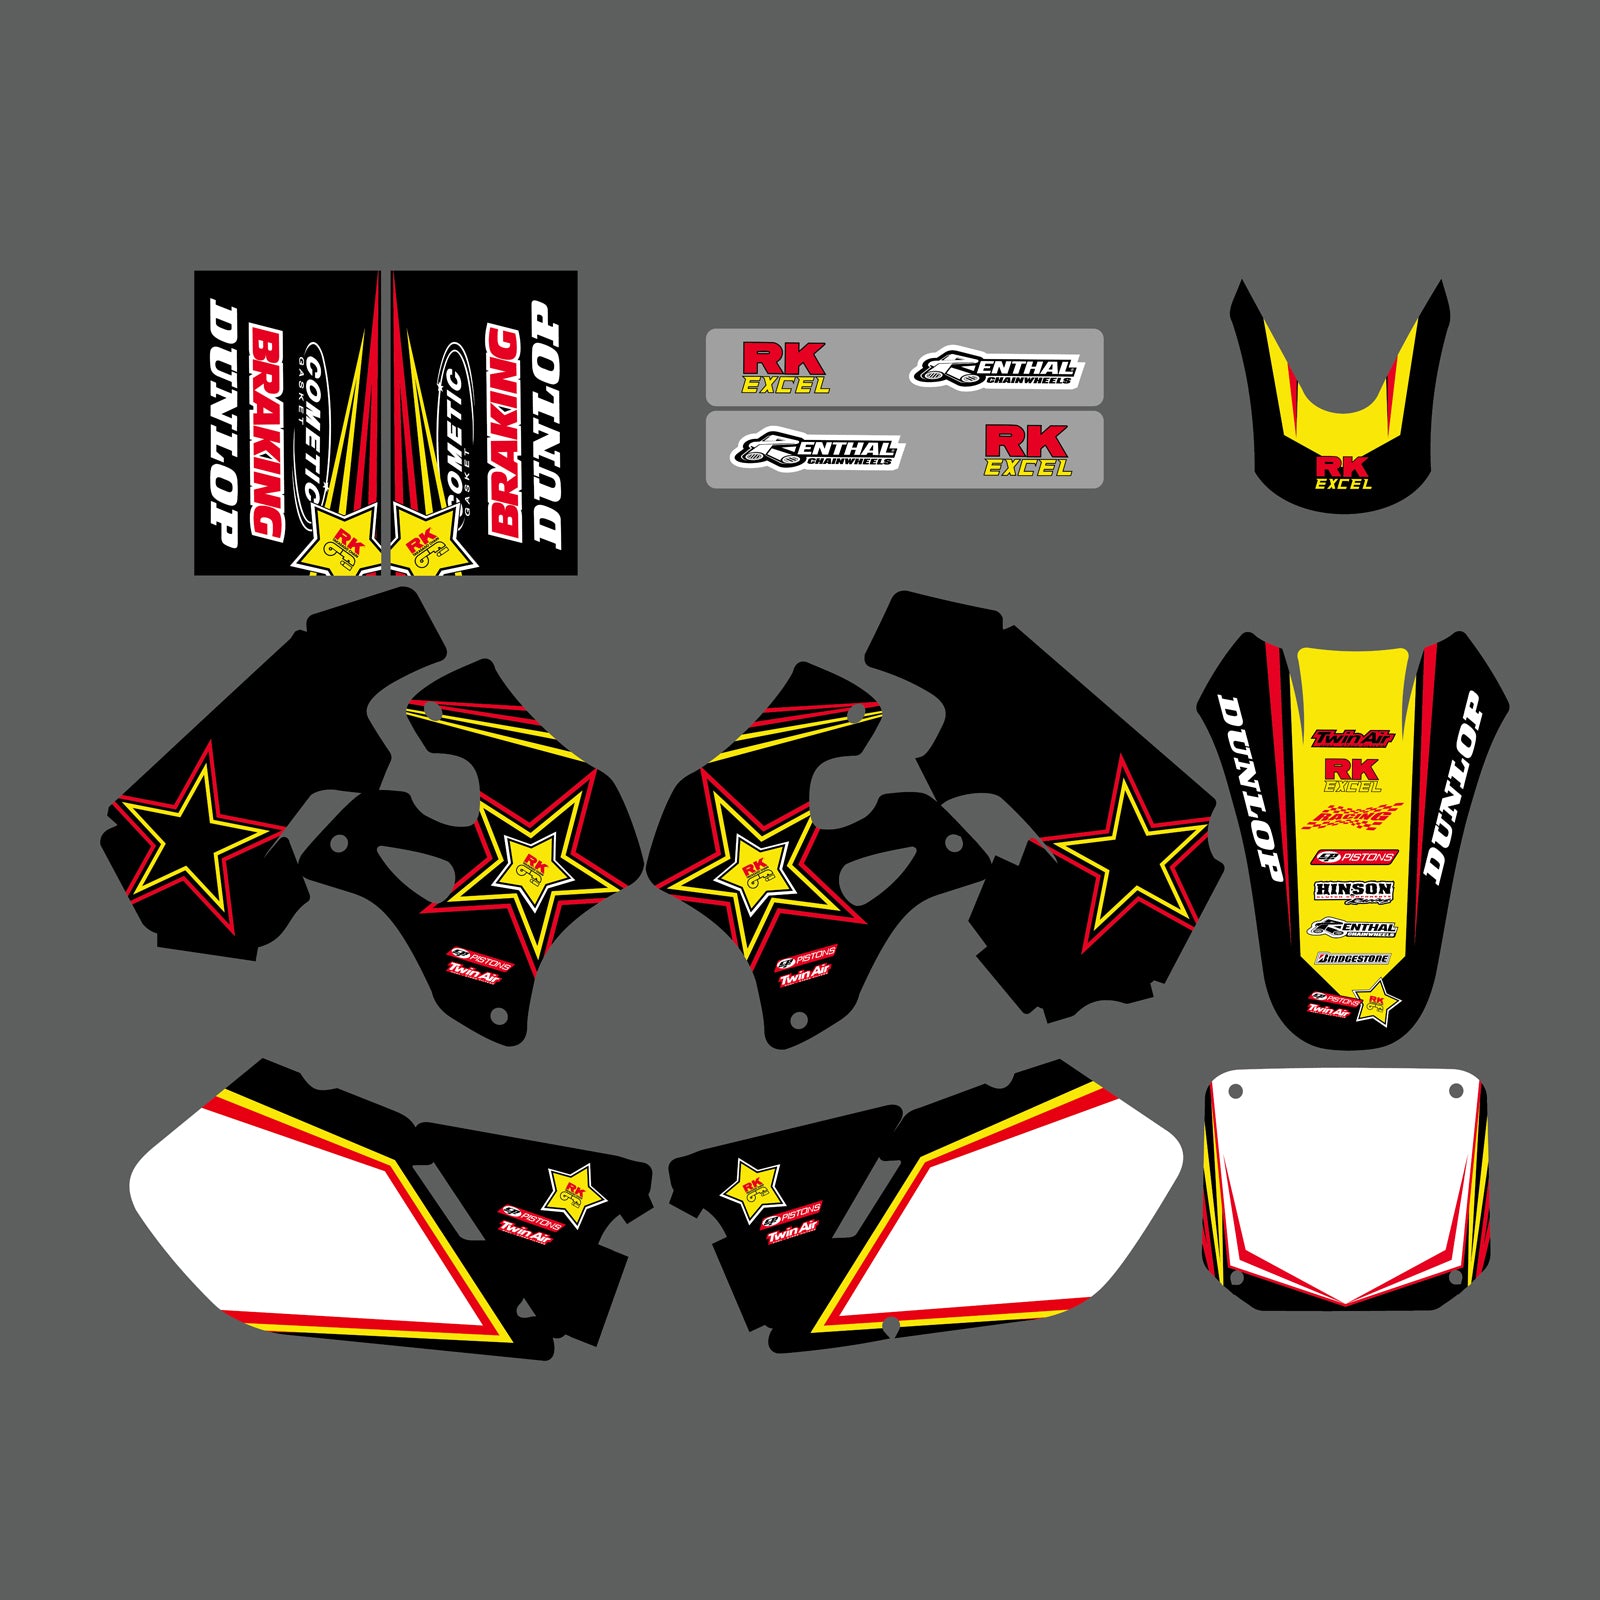 Full Graphic Background Decal Stickers for SUZUKI RM125/RM250 1996-1998